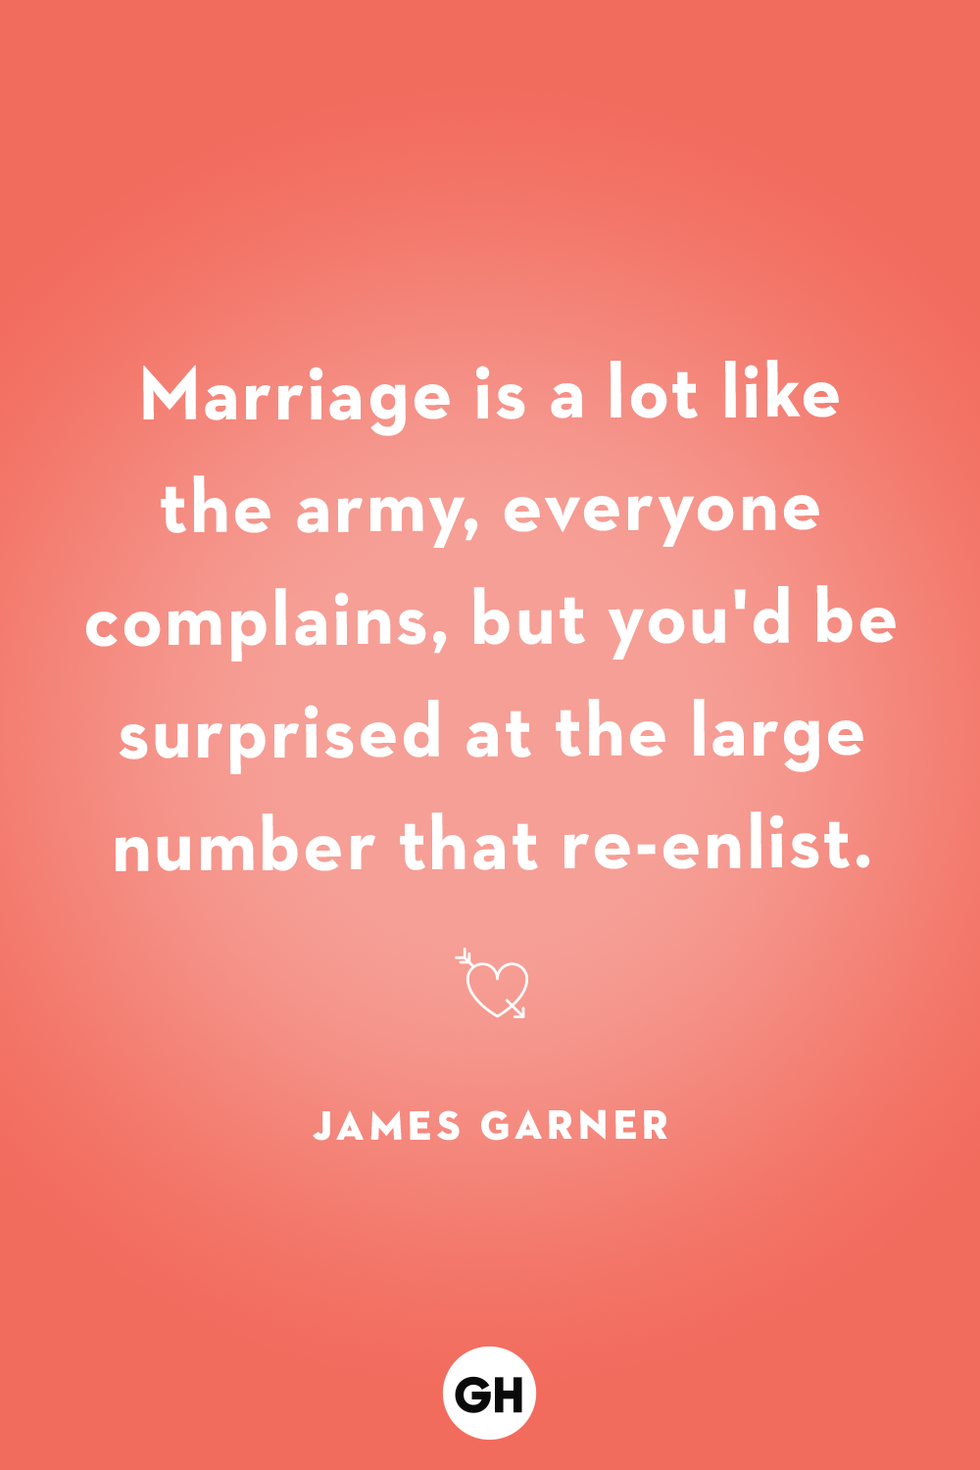 marriage is a lot like the army, everyone complains, but you'd be surprised at the large number that reenlist james garner